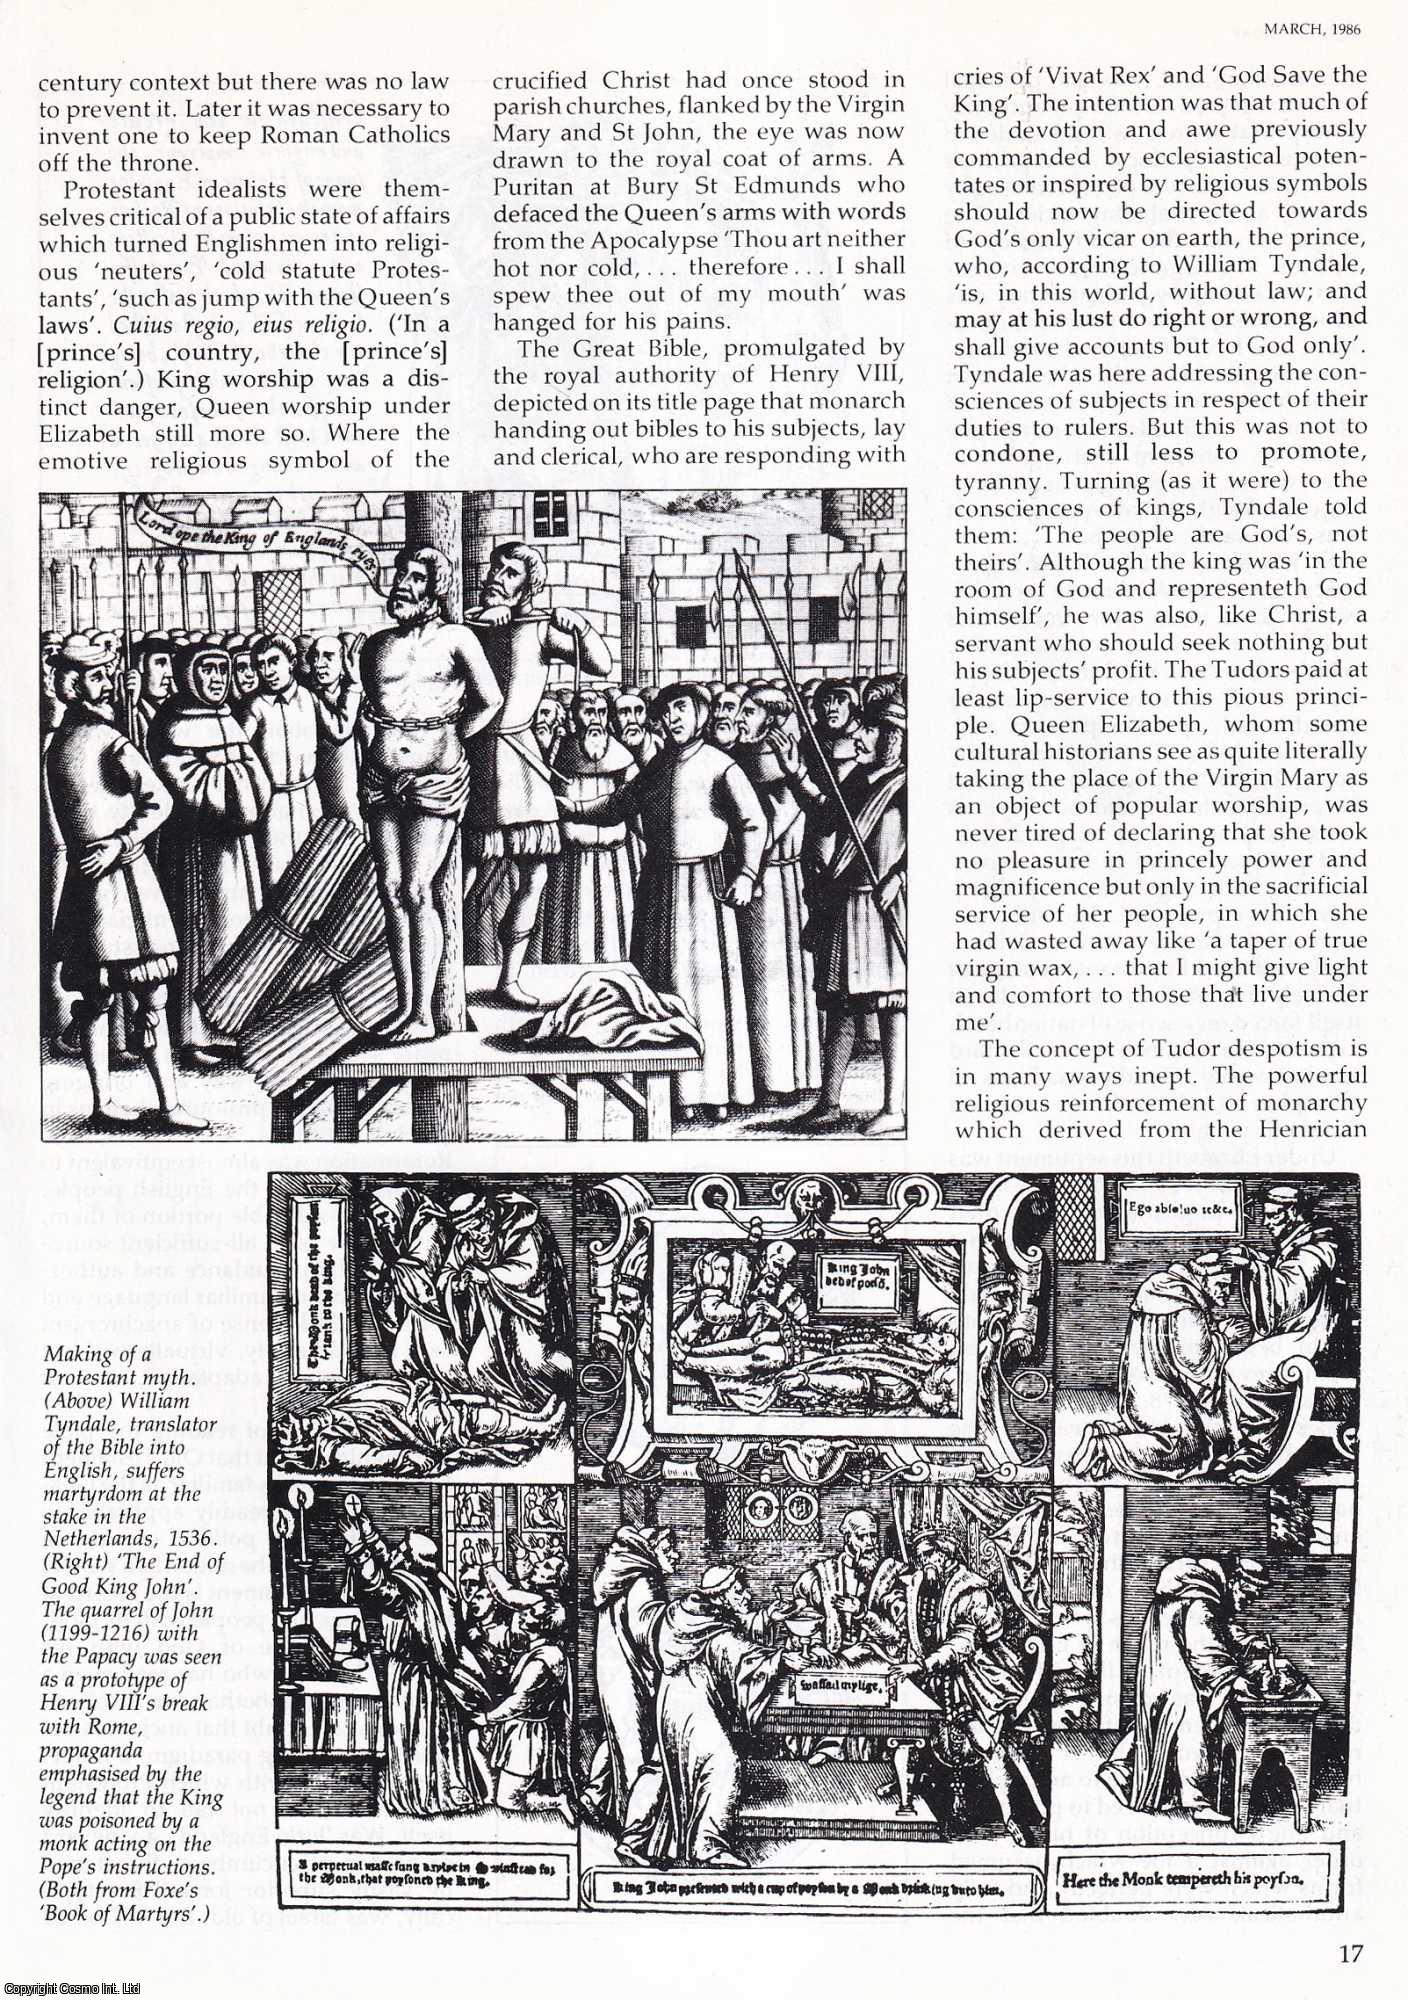 Patrick Collinson - A Chosen People?: The English Church and the Reformation. An original article from History Today, 1986.